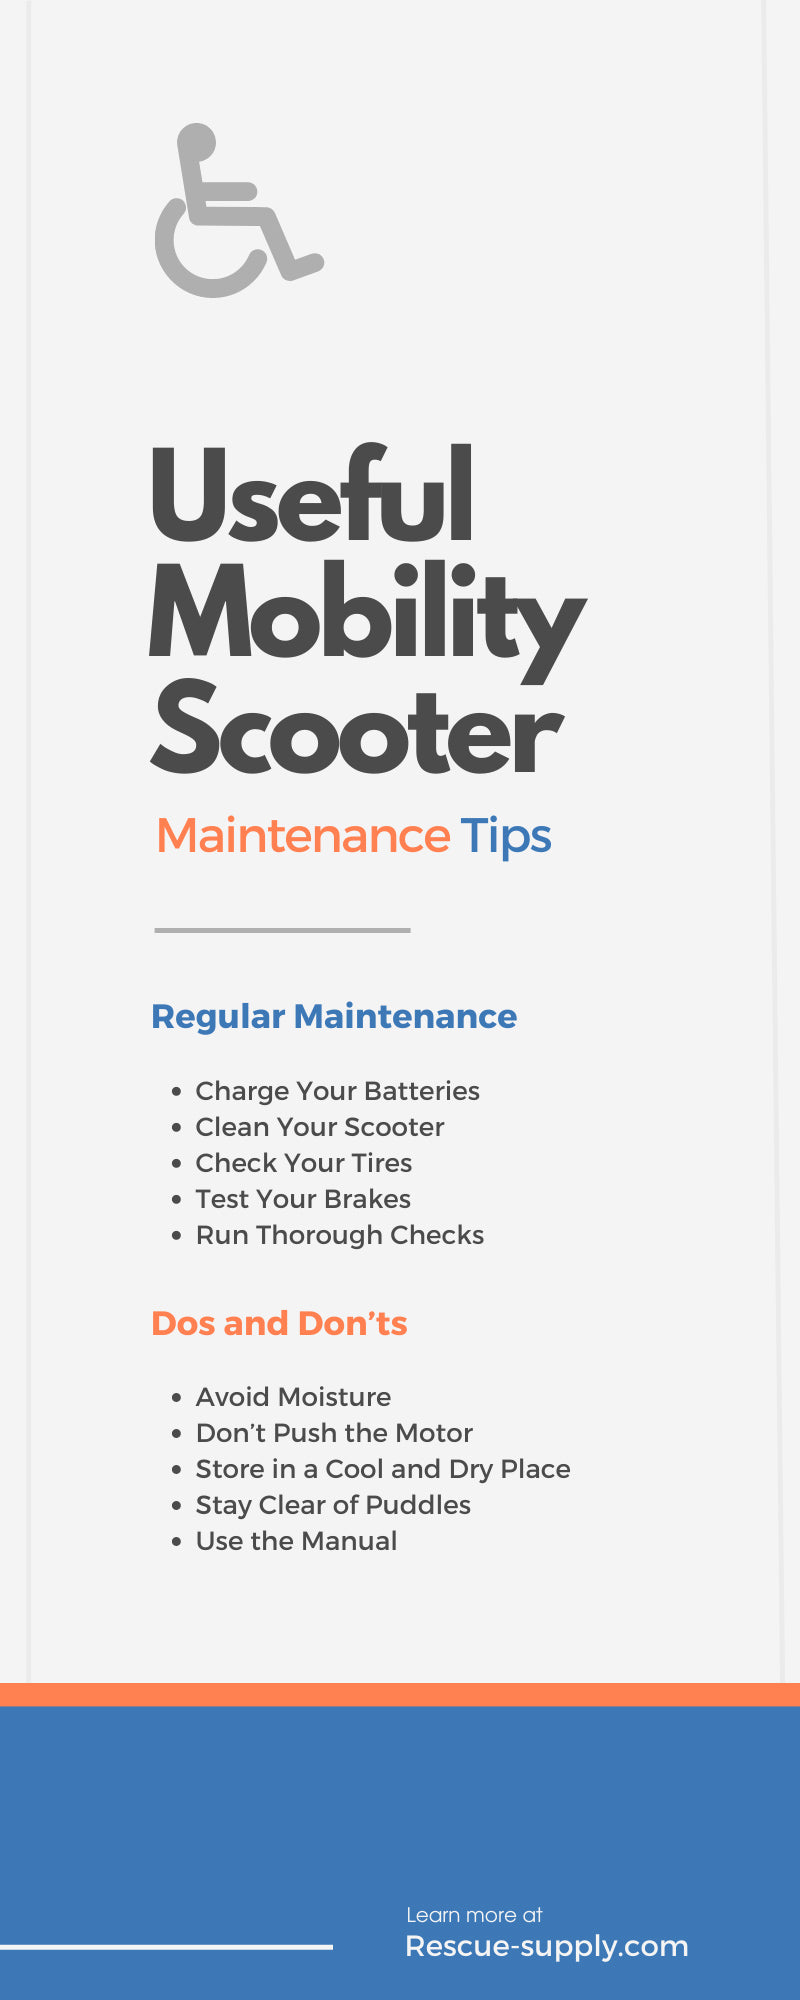 Useful Mobility Scooter Maintenance Tips